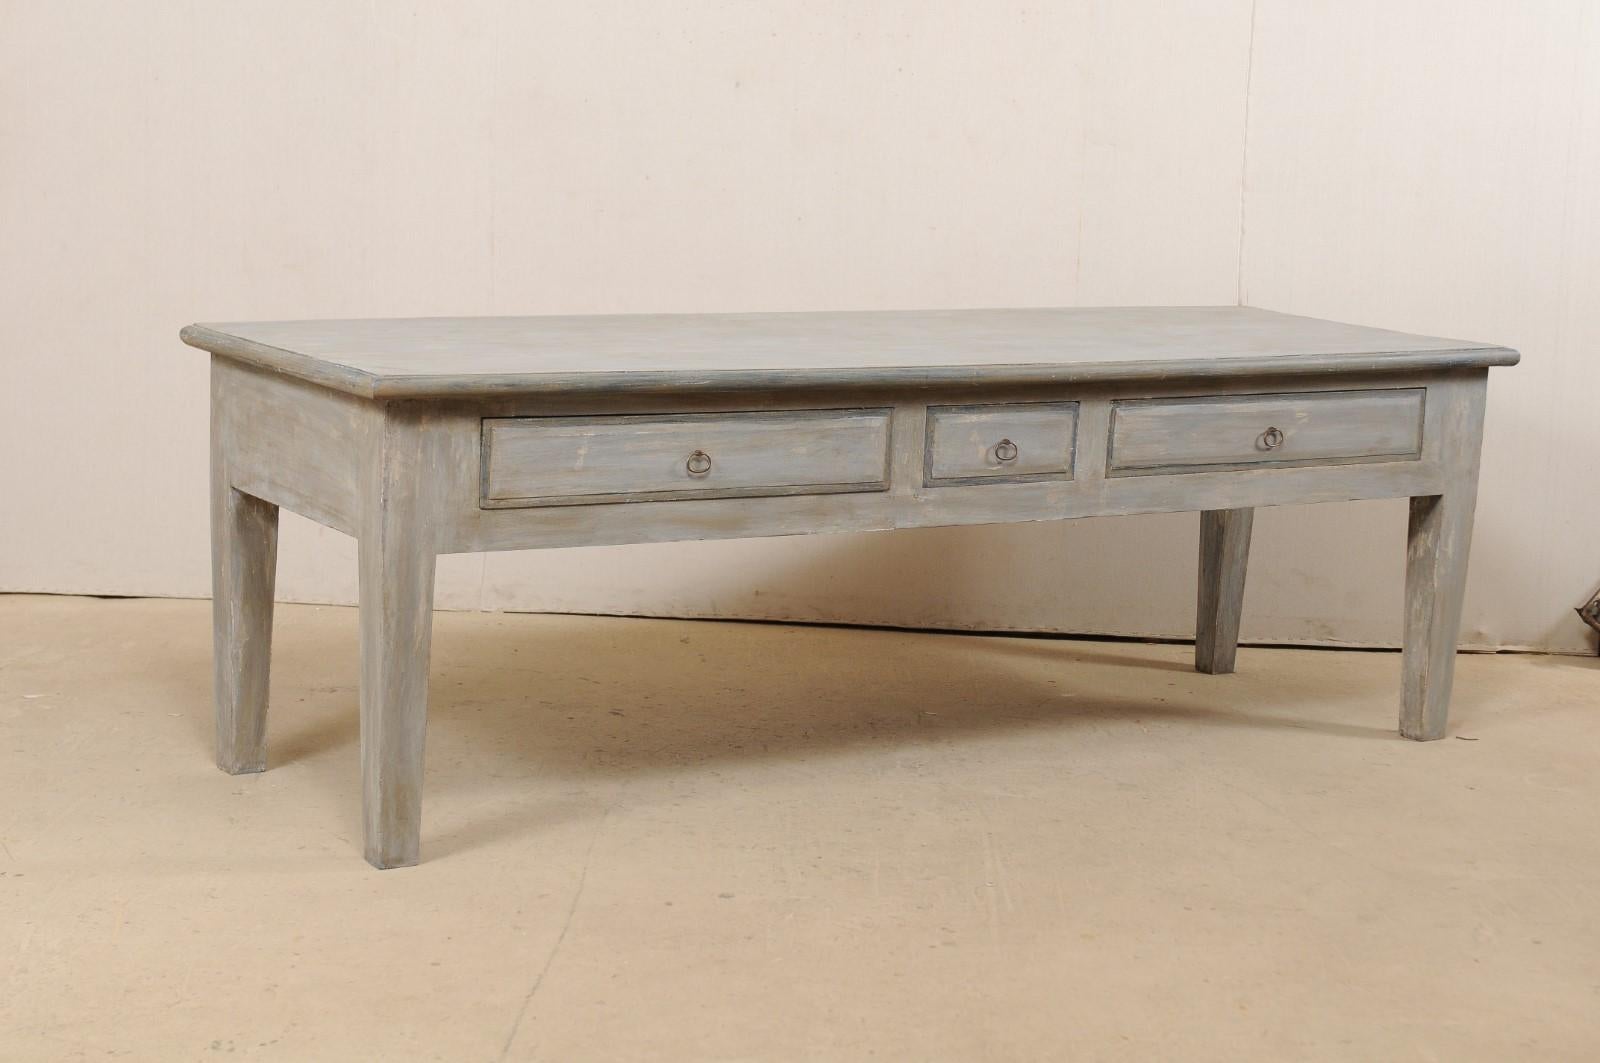 A large-sized American custom kitchen island table with drawers. This impressive table has been fashioned from old reclaimed wood and features a rectangular-shaped top, over a thick clean-lined apron which houses three-drawers along one side, and is